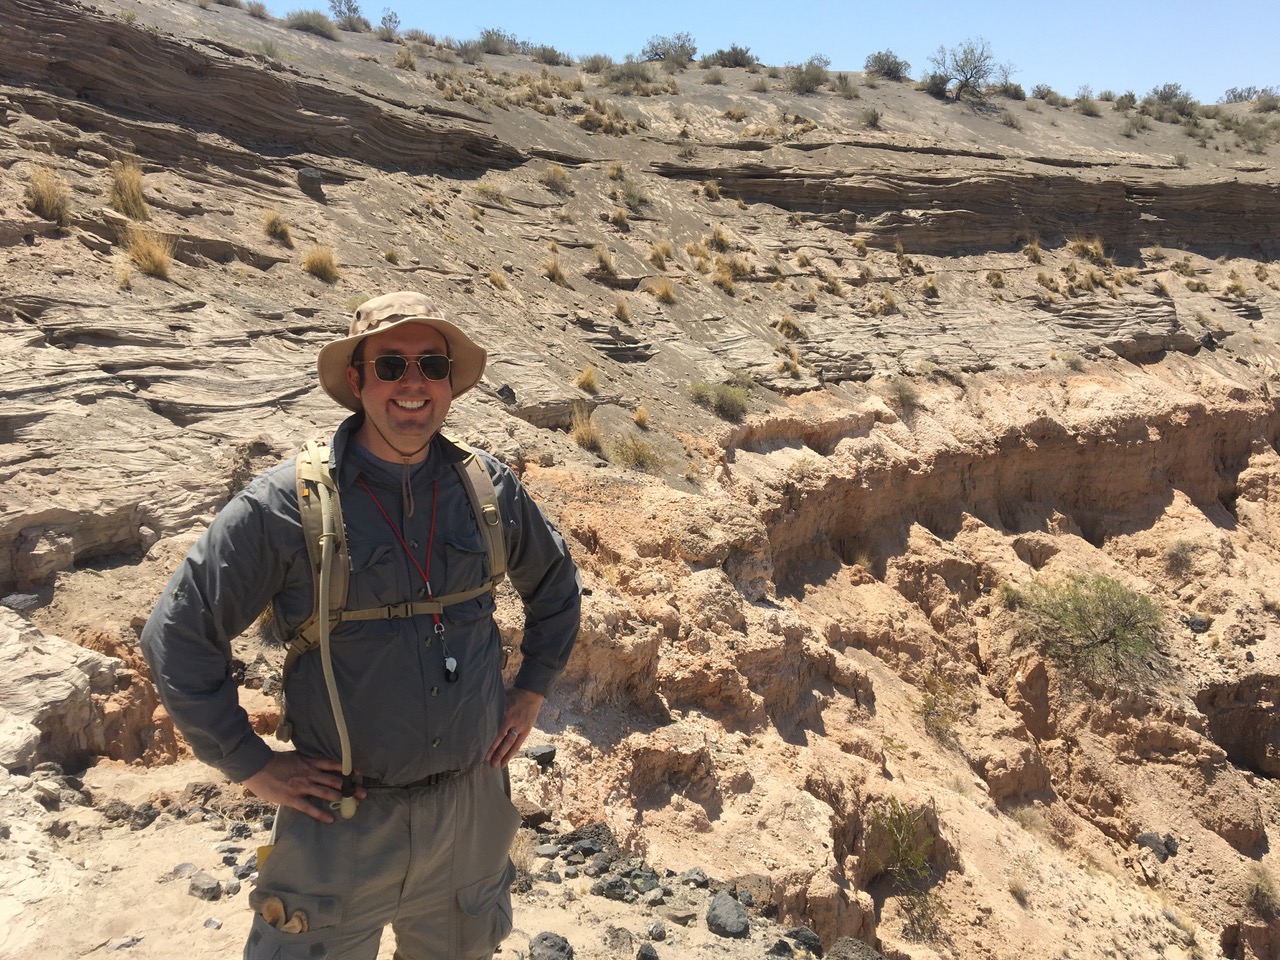 Noah Petro, planetary scientist at NASA's Goddard Space Flight Center, seen at the Kilbourne Hole in New Mexico.